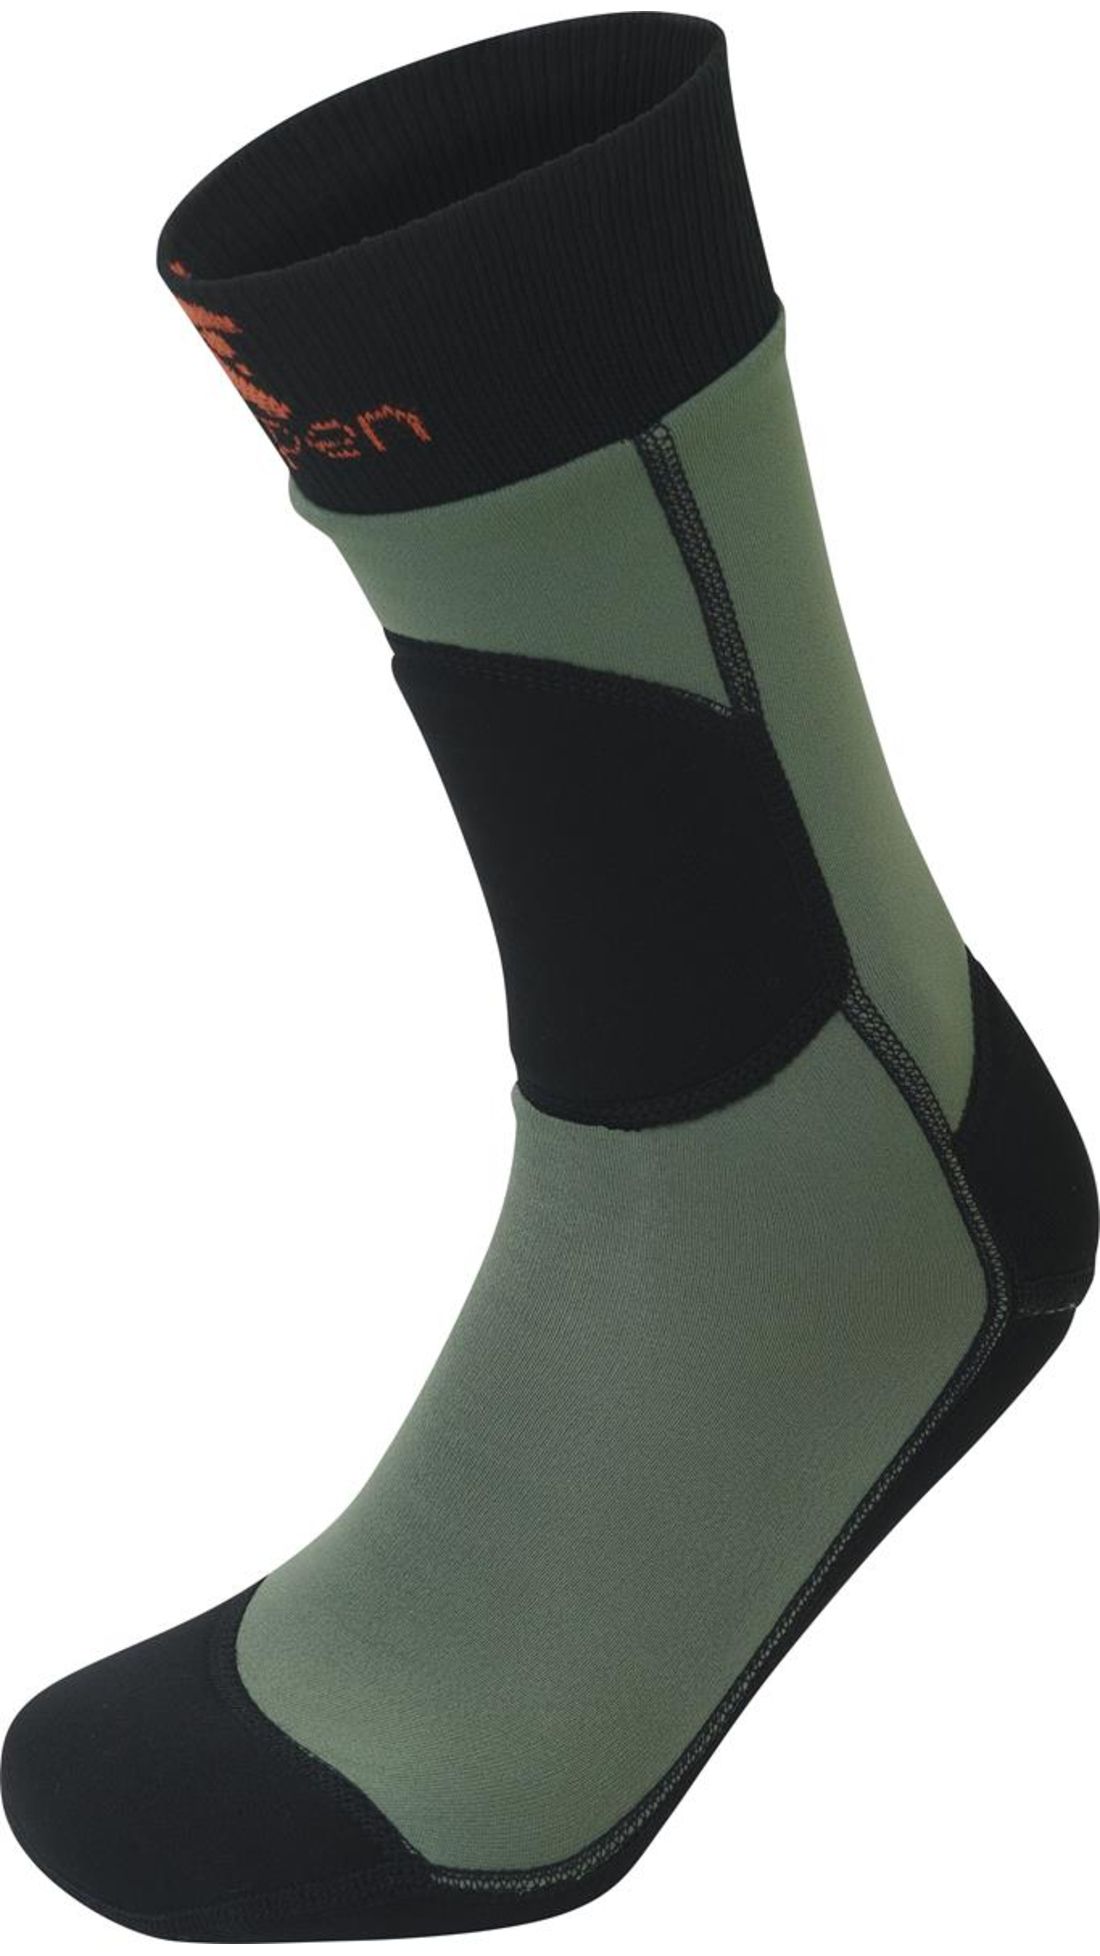 men black socks with camping forest scenery